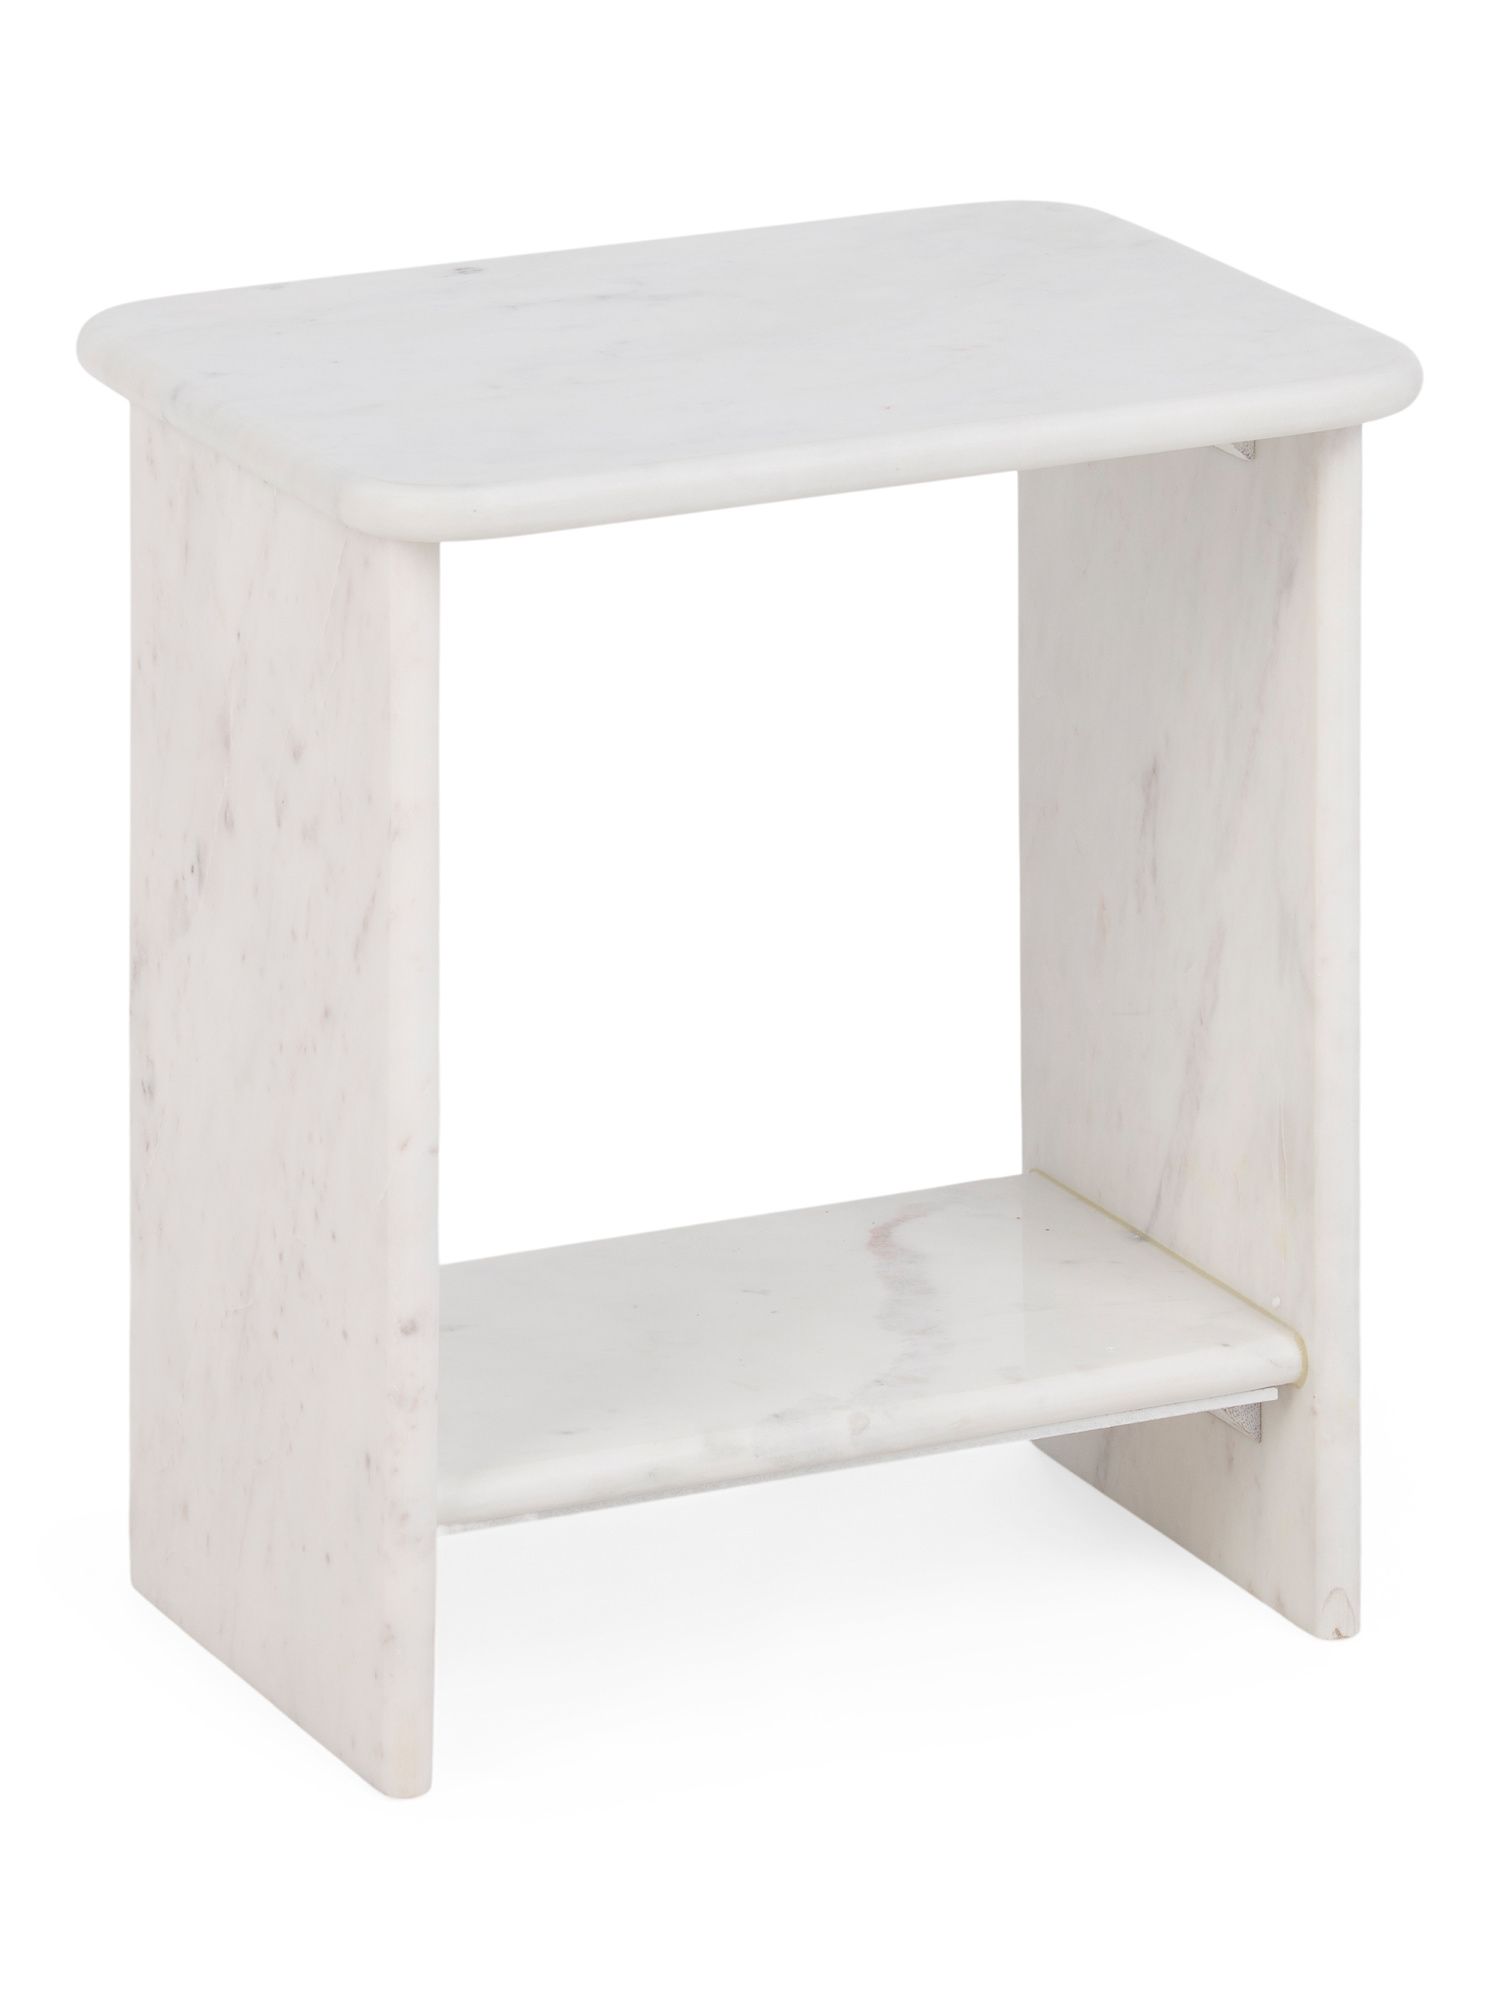 Marble Side Table With Shelf | Marshalls